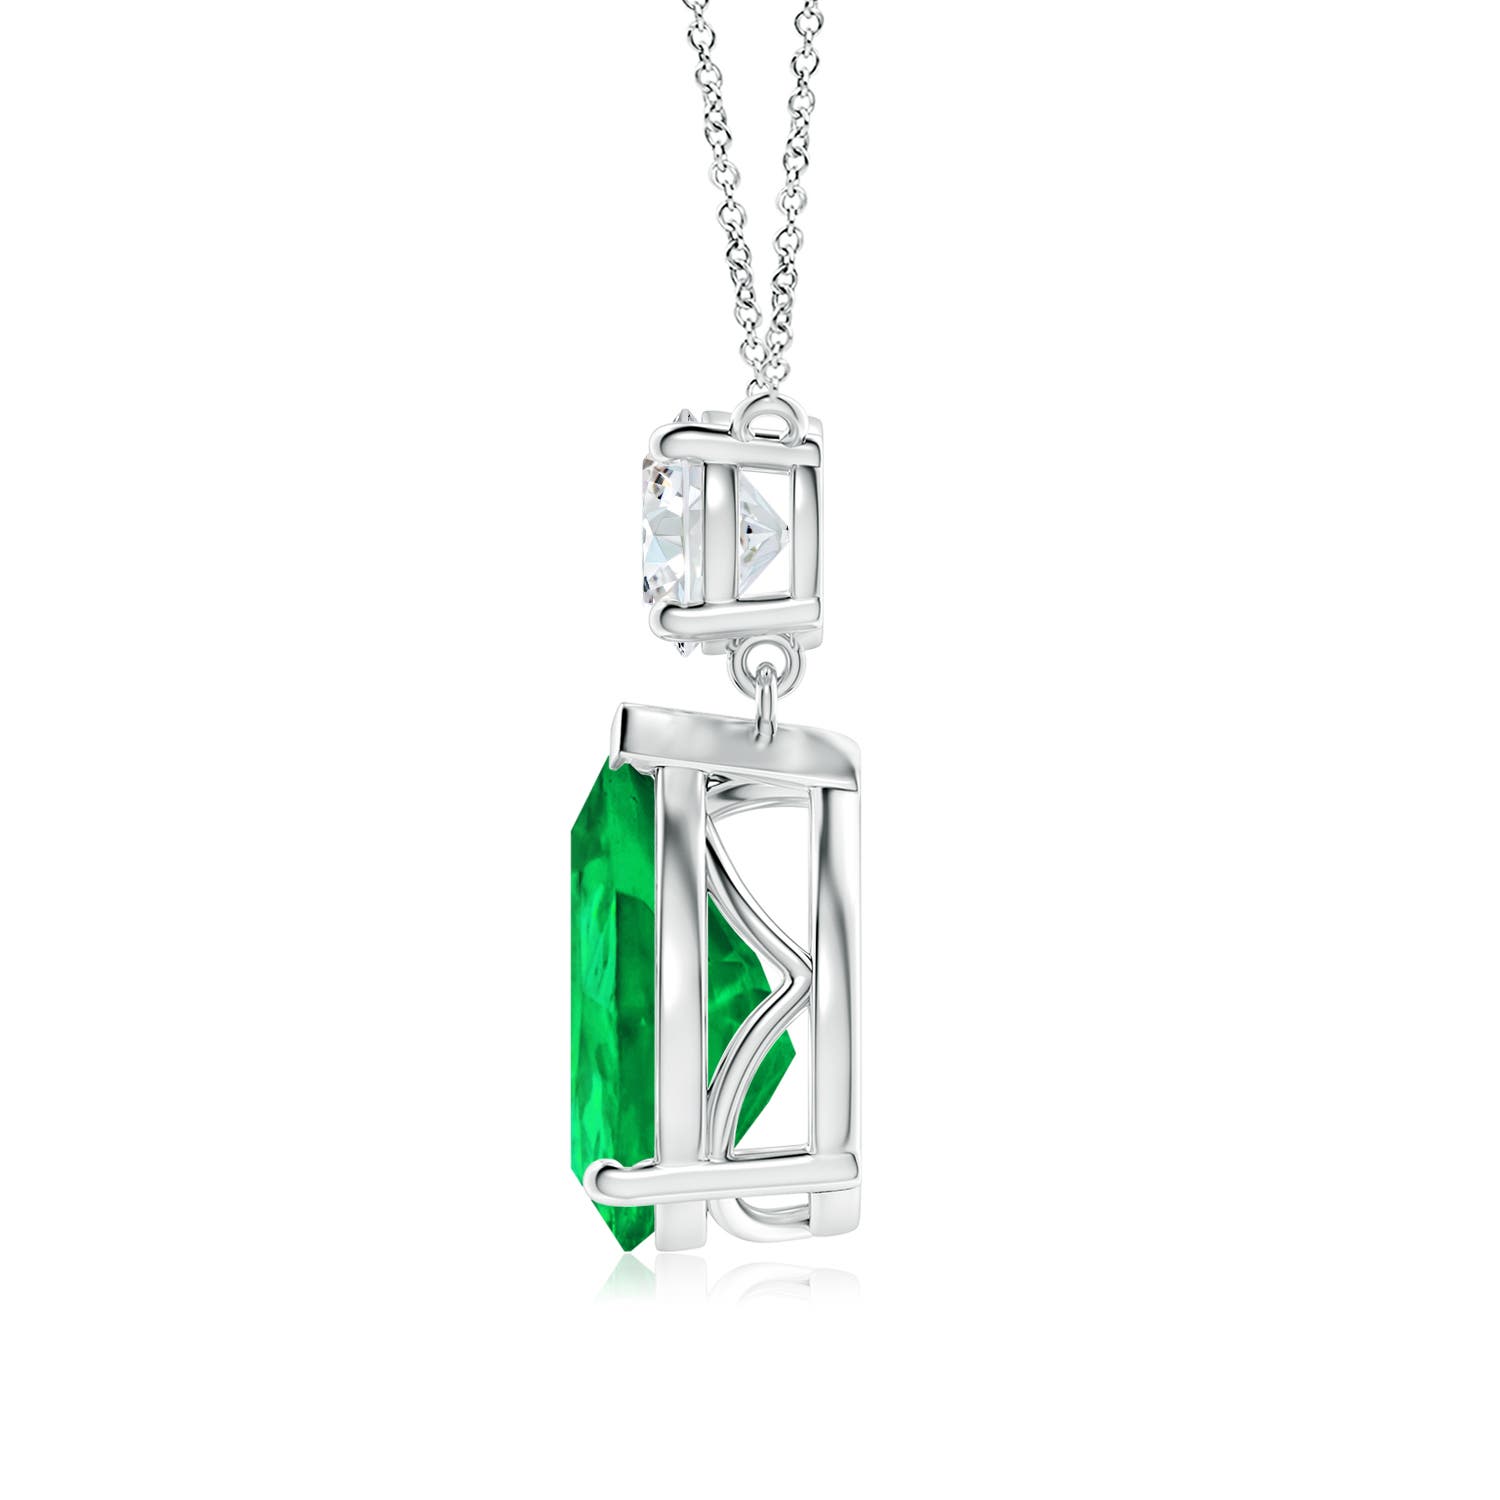 AAA - Emerald / 5.21 CT / 18 KT White Gold